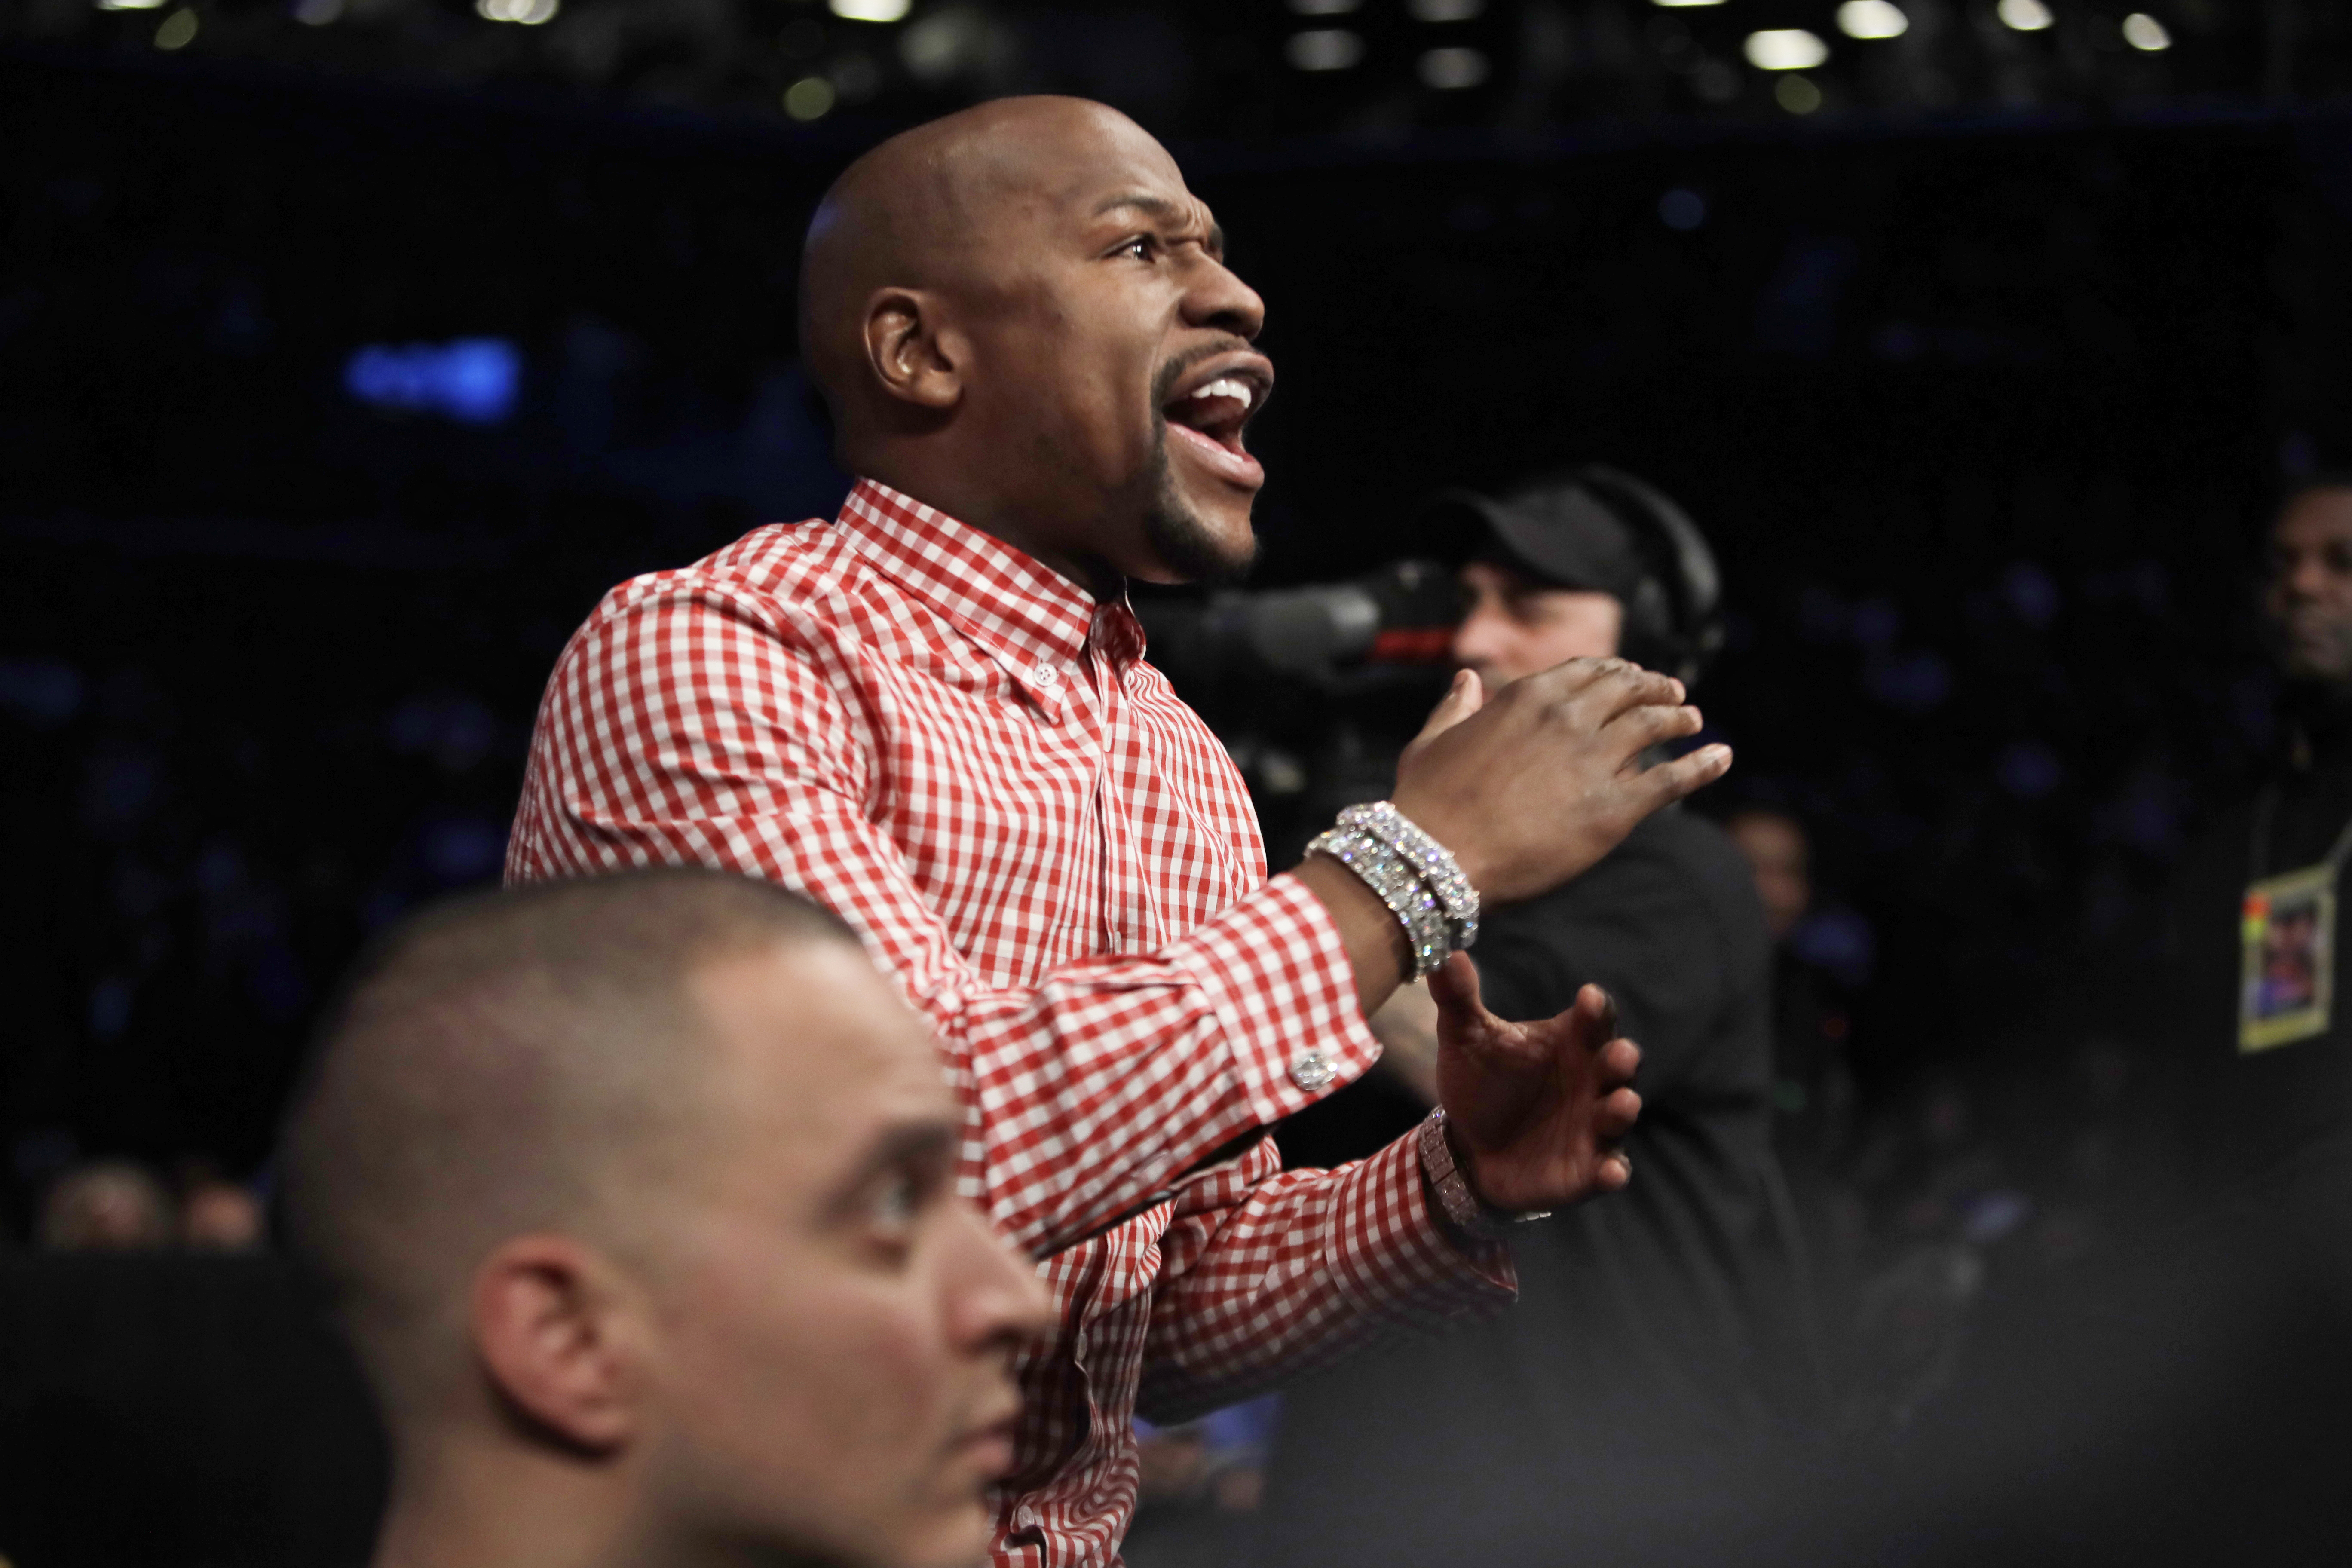 In this Jan 14, 2017, file photo, Floyd Mayweather Jr. reacts during the third round of a junior lightweight title fight between Jose Pedraza, of Puerto Rico, and Gervonta Davis in New York. (AP Photo/Frank Franklin II, File)